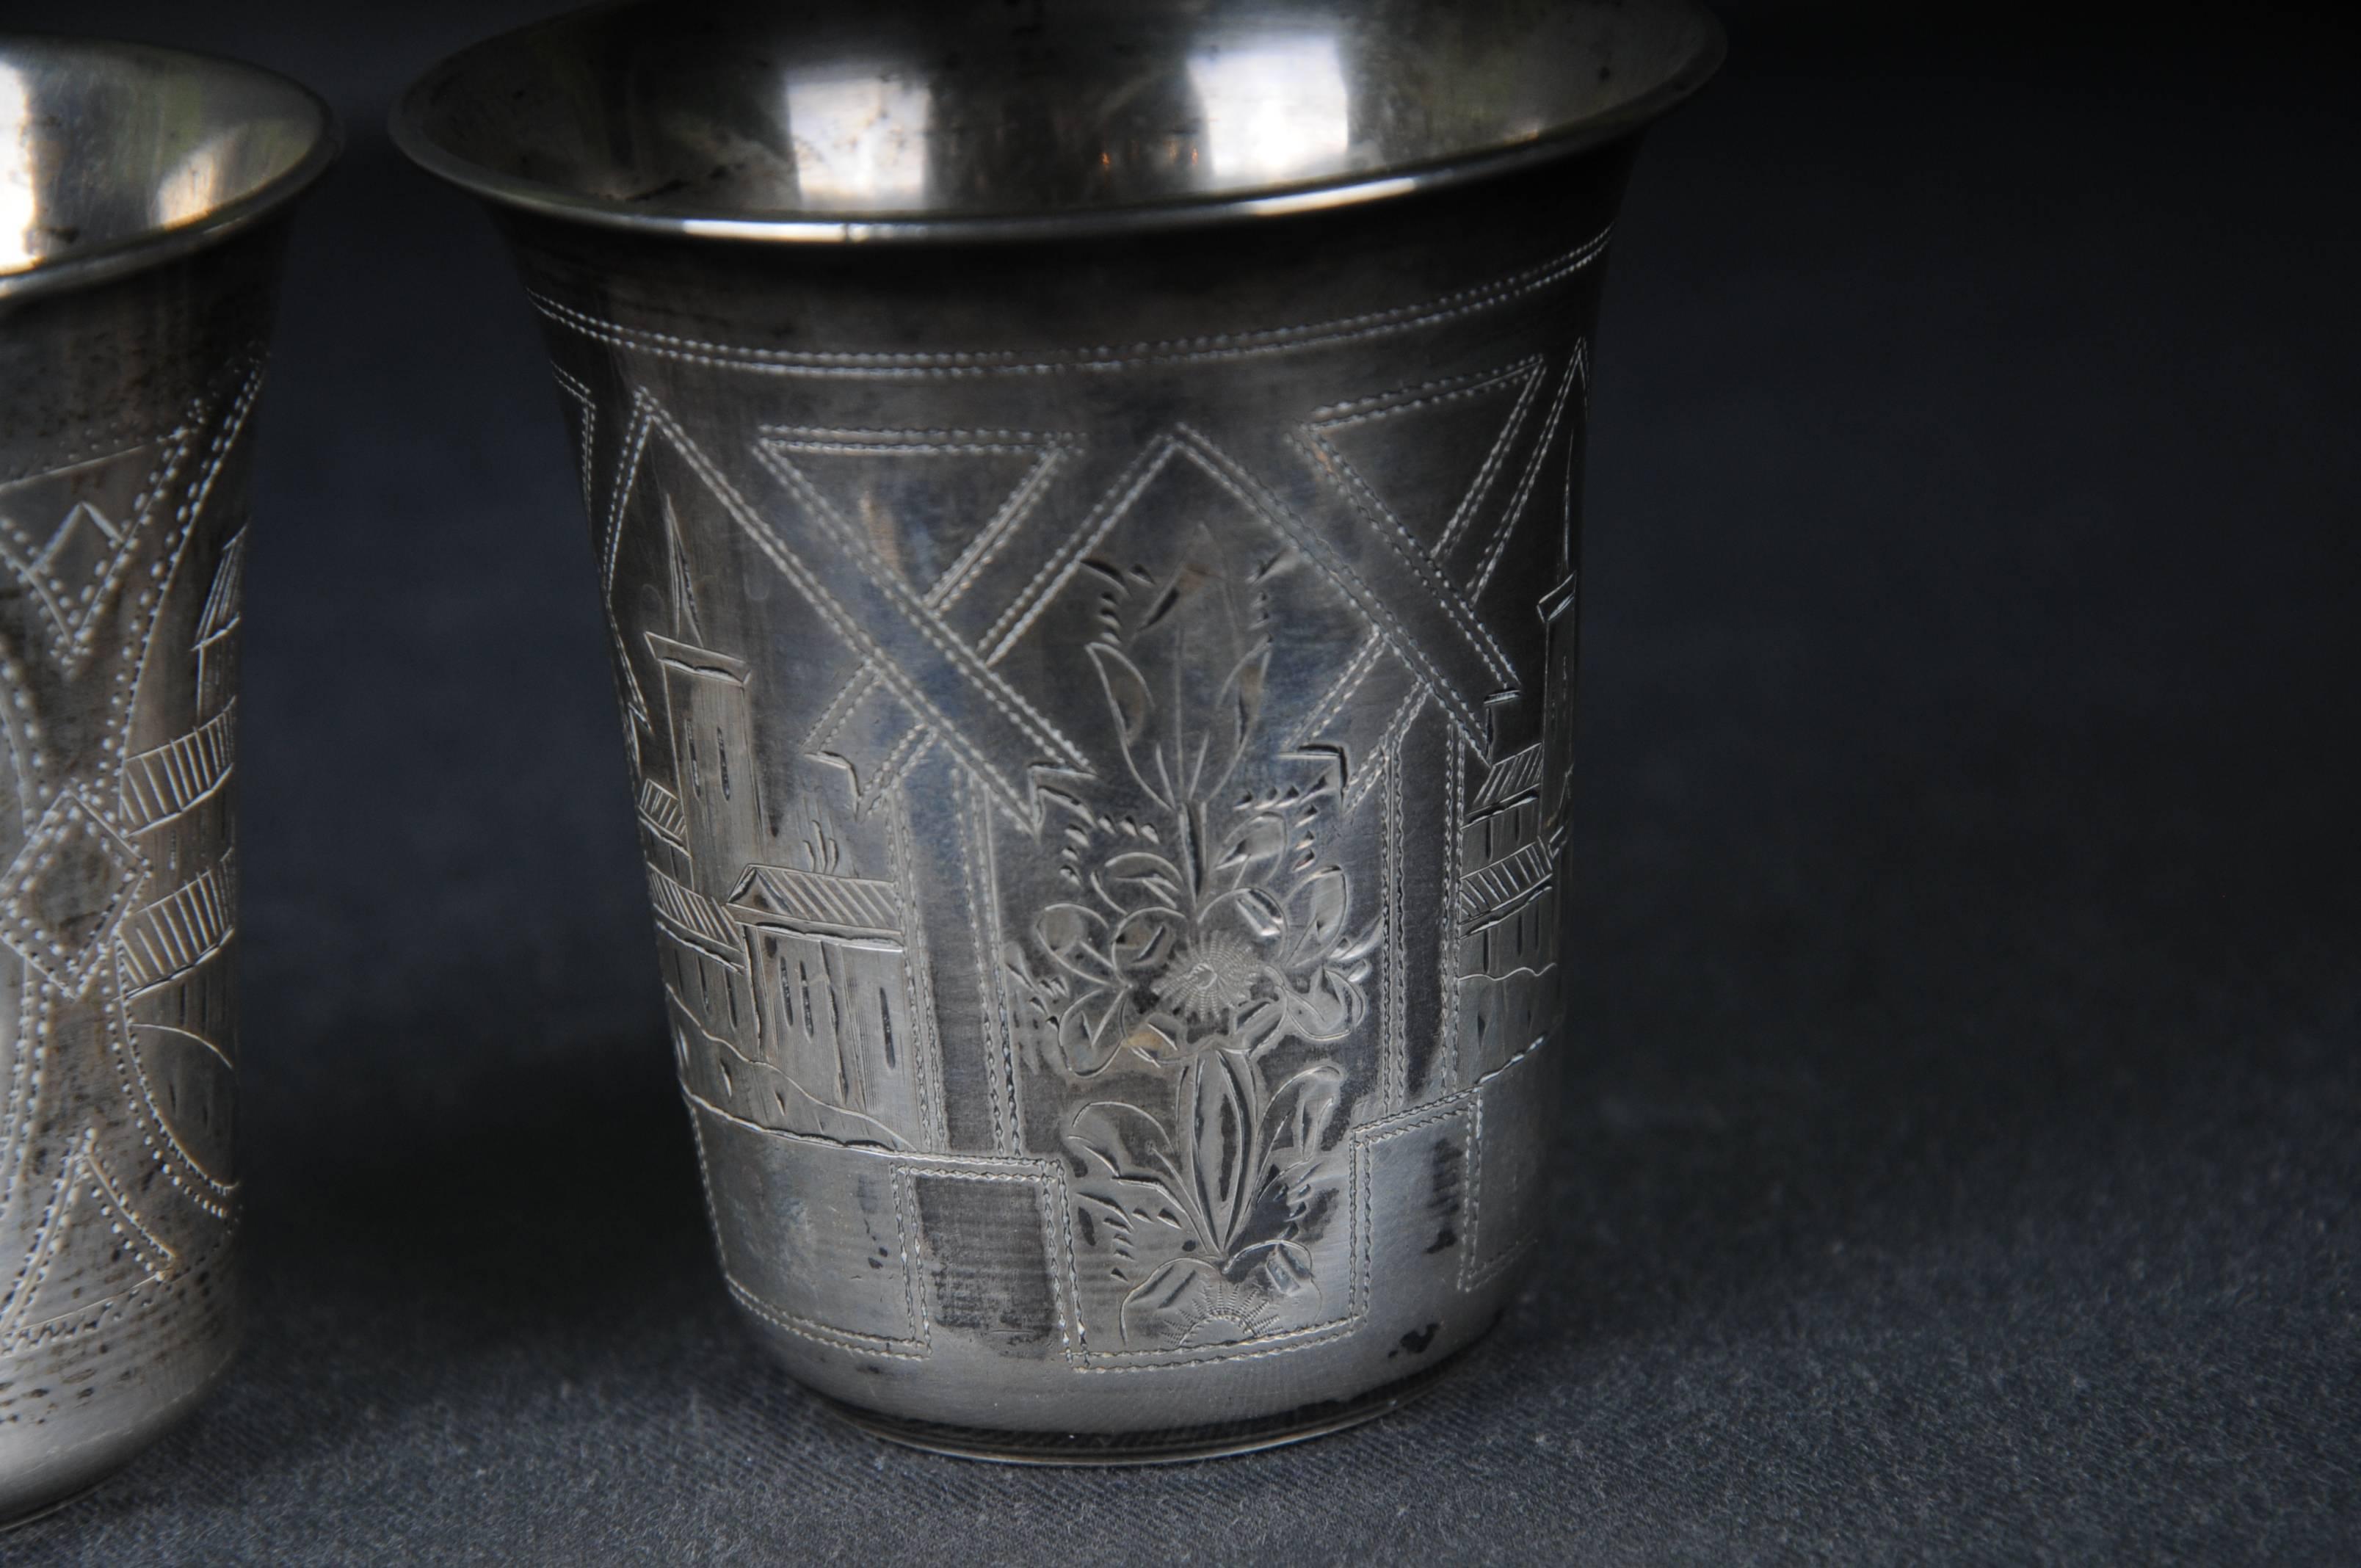 2 Antique Silver Mug 84 Silver Russian Viktor Sawinkow Flowers City 875er Silver For Sale 1